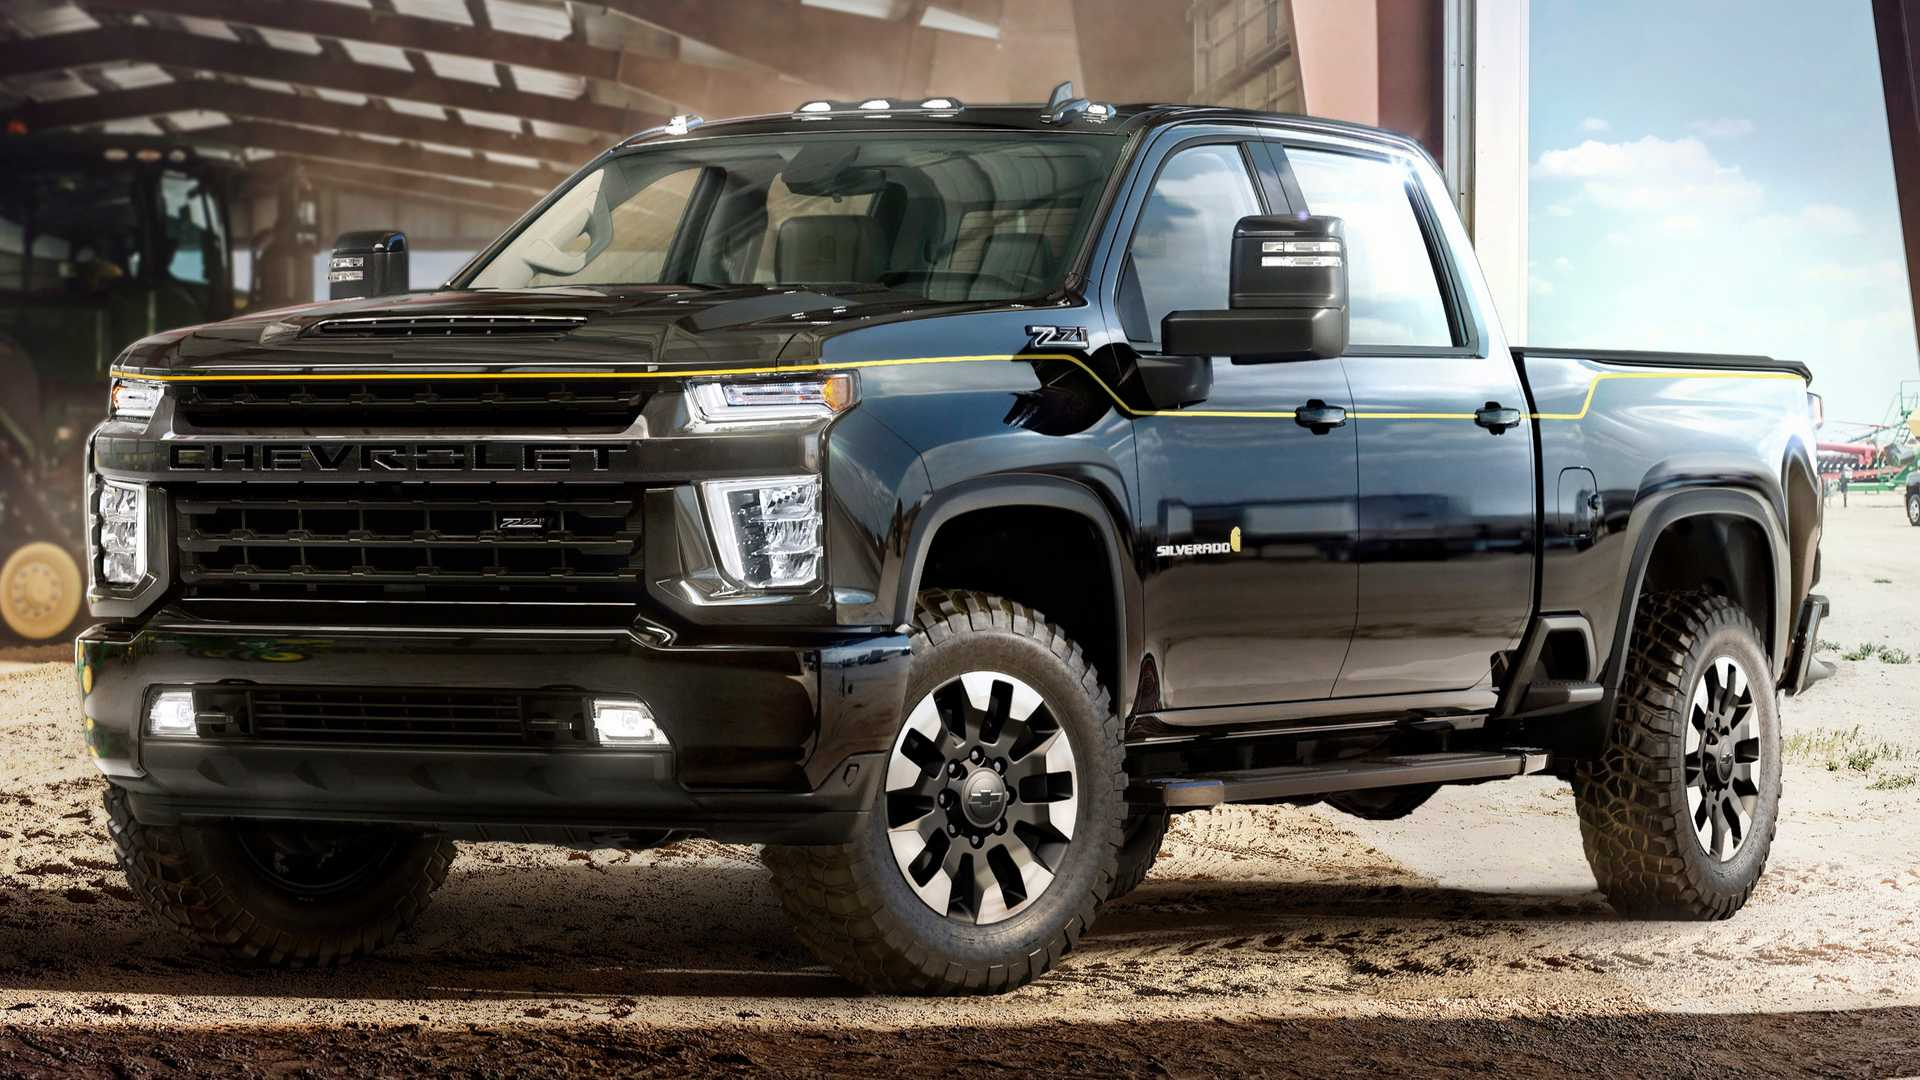 2021 Chevy Silverado Electric - Price, Review & Release Date - New 2022